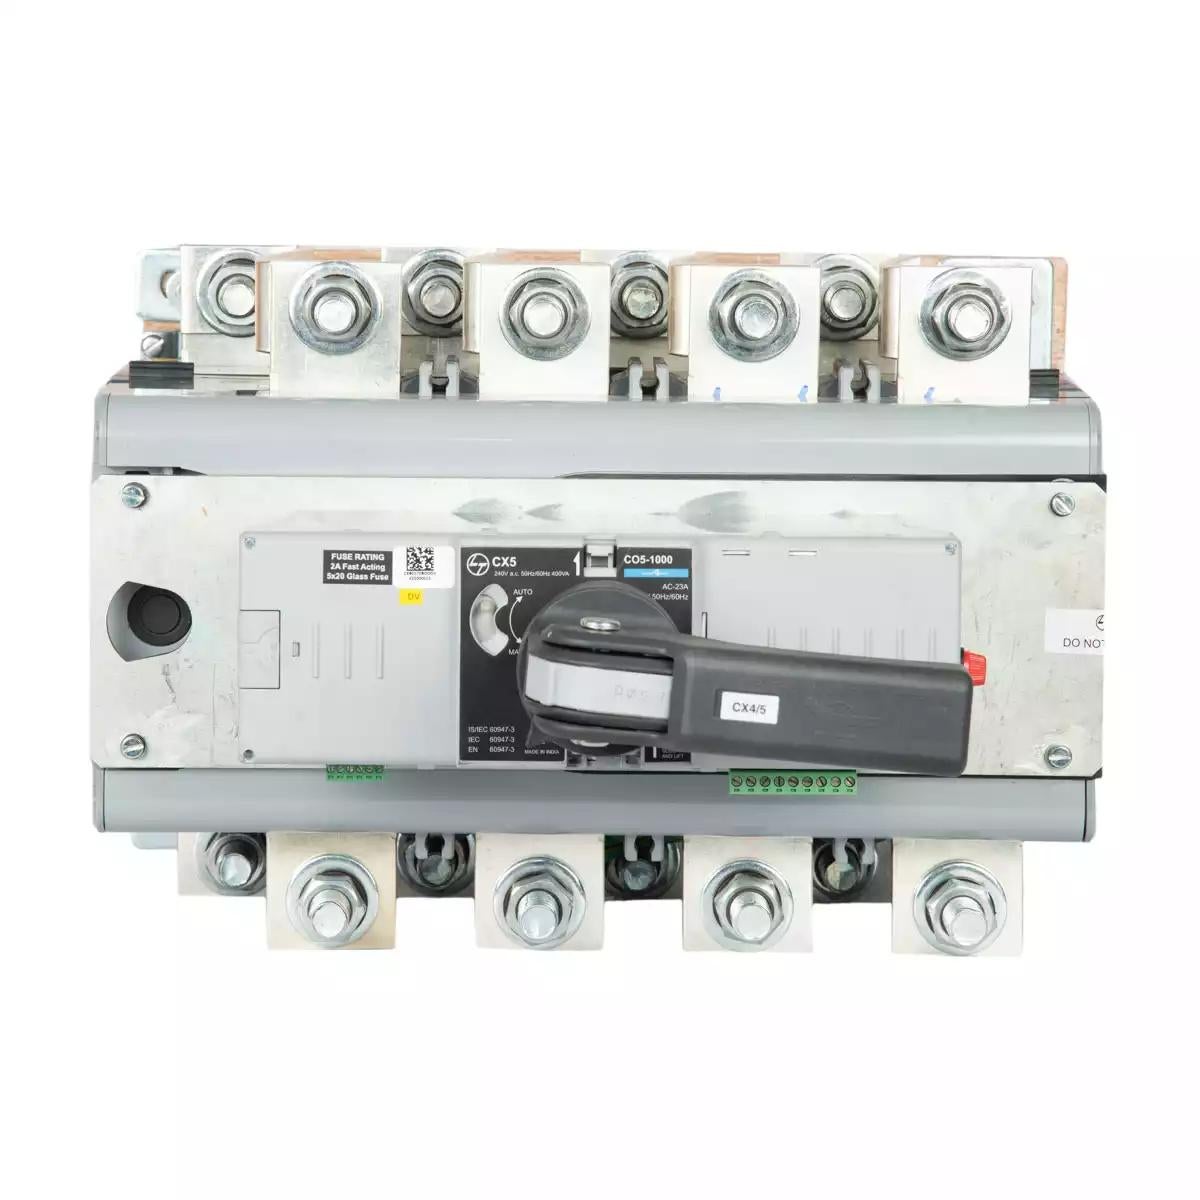 C-Line Motorised Changeover Switch FR5 1000A 4P 415V AC Open Execution